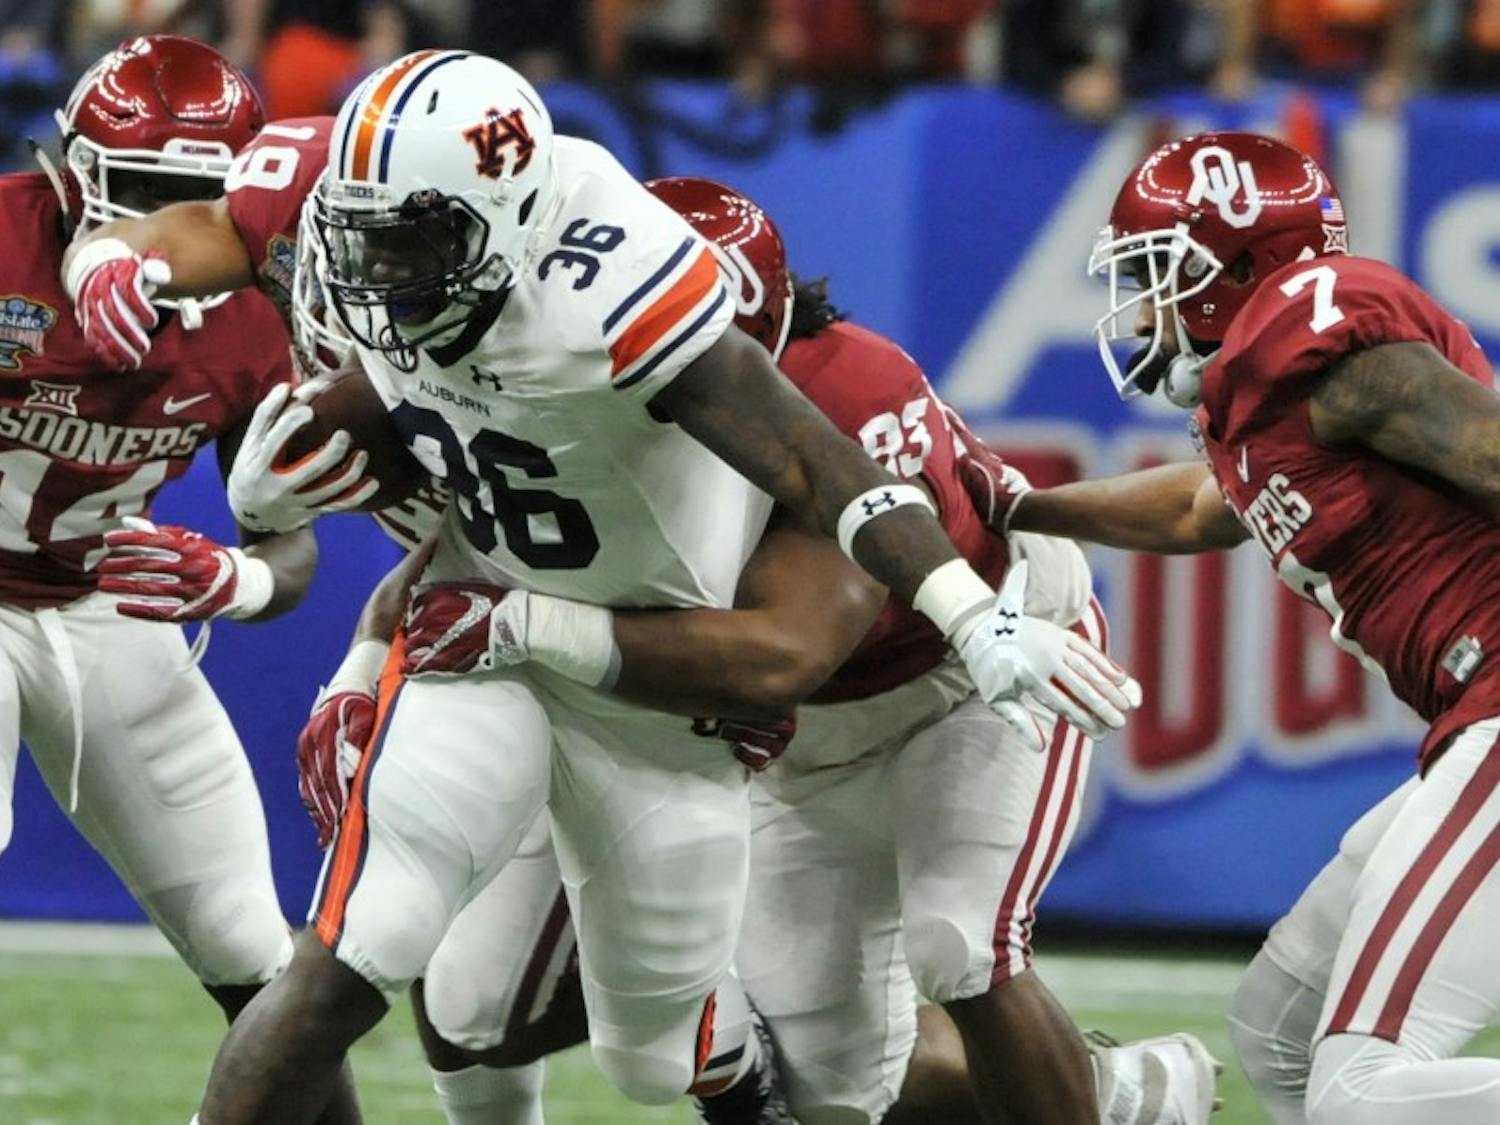 Kamryn Pettway runs the ball&nbsp;during the first half of the Allstate Sugar Bowl, Monday, Jan. 2, 2017, in New Orleans, LA. 